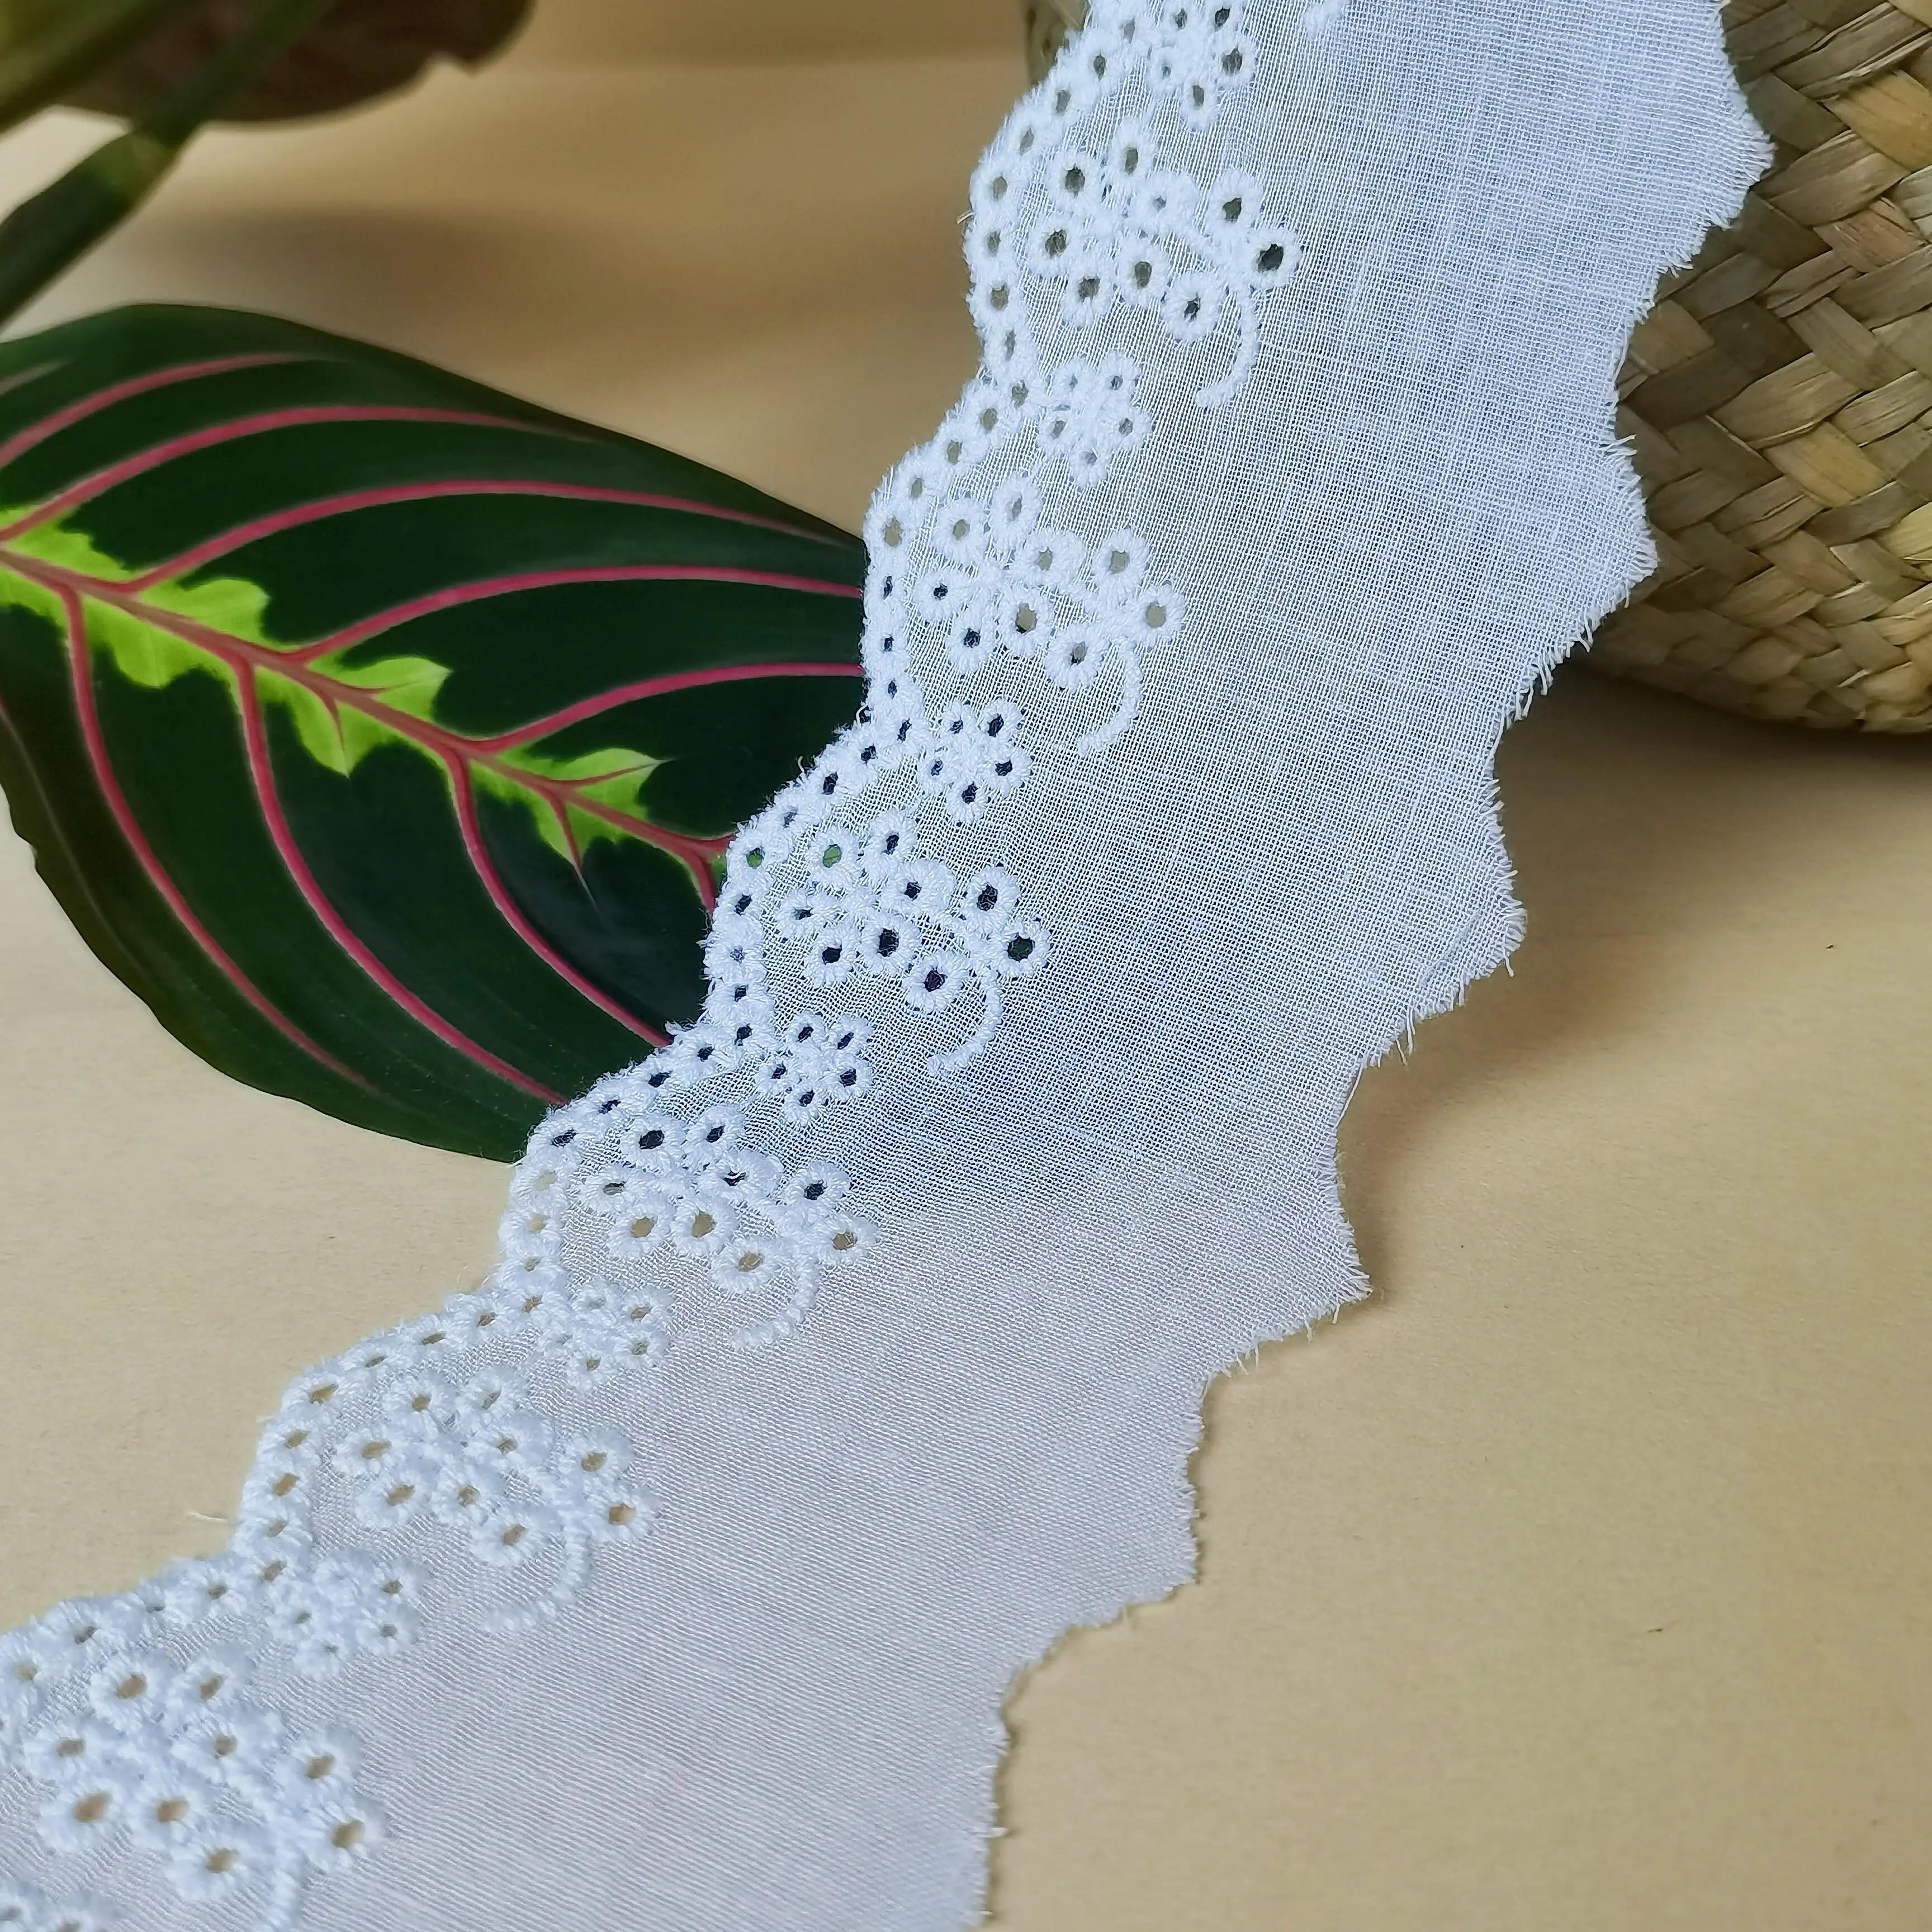 Wholesale High Quality 100% White Cotton Lace Trim Fabric Narrow Eyelet Embroidered Heart Shape Lace for Wedding Clothes